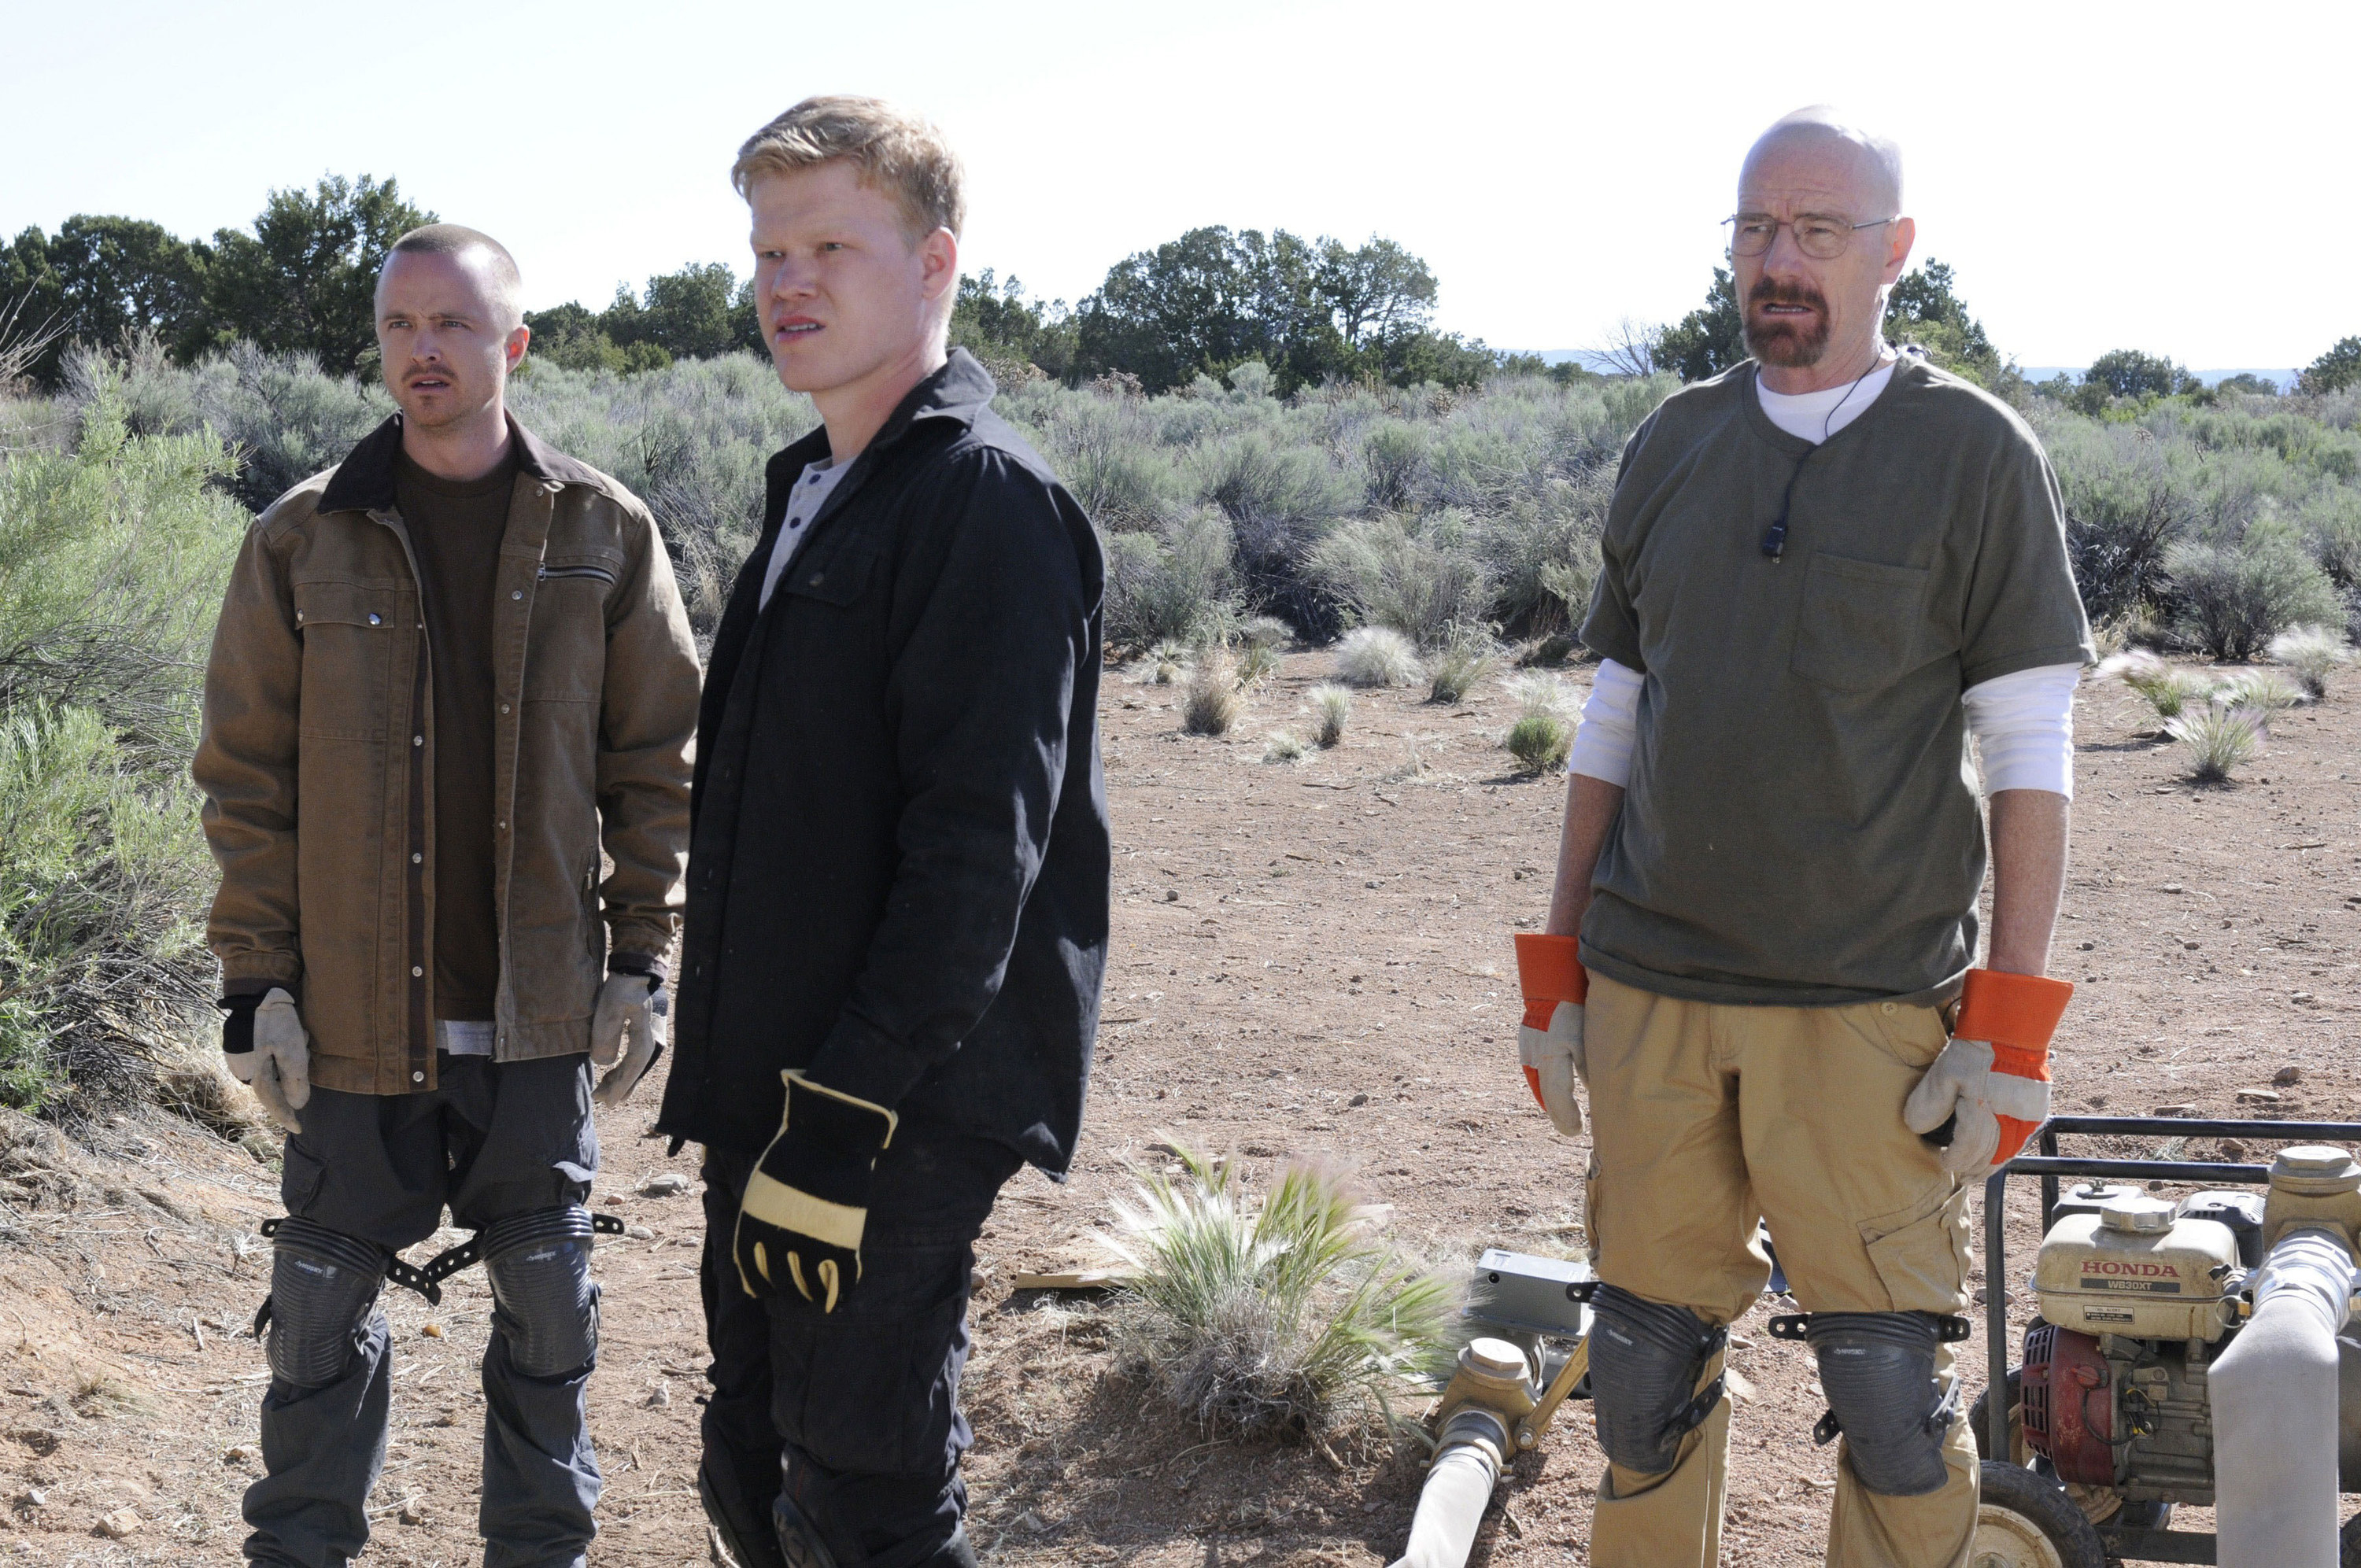 Jesse, Walter, and Todd from Breaking Bad stand at a desert construction site